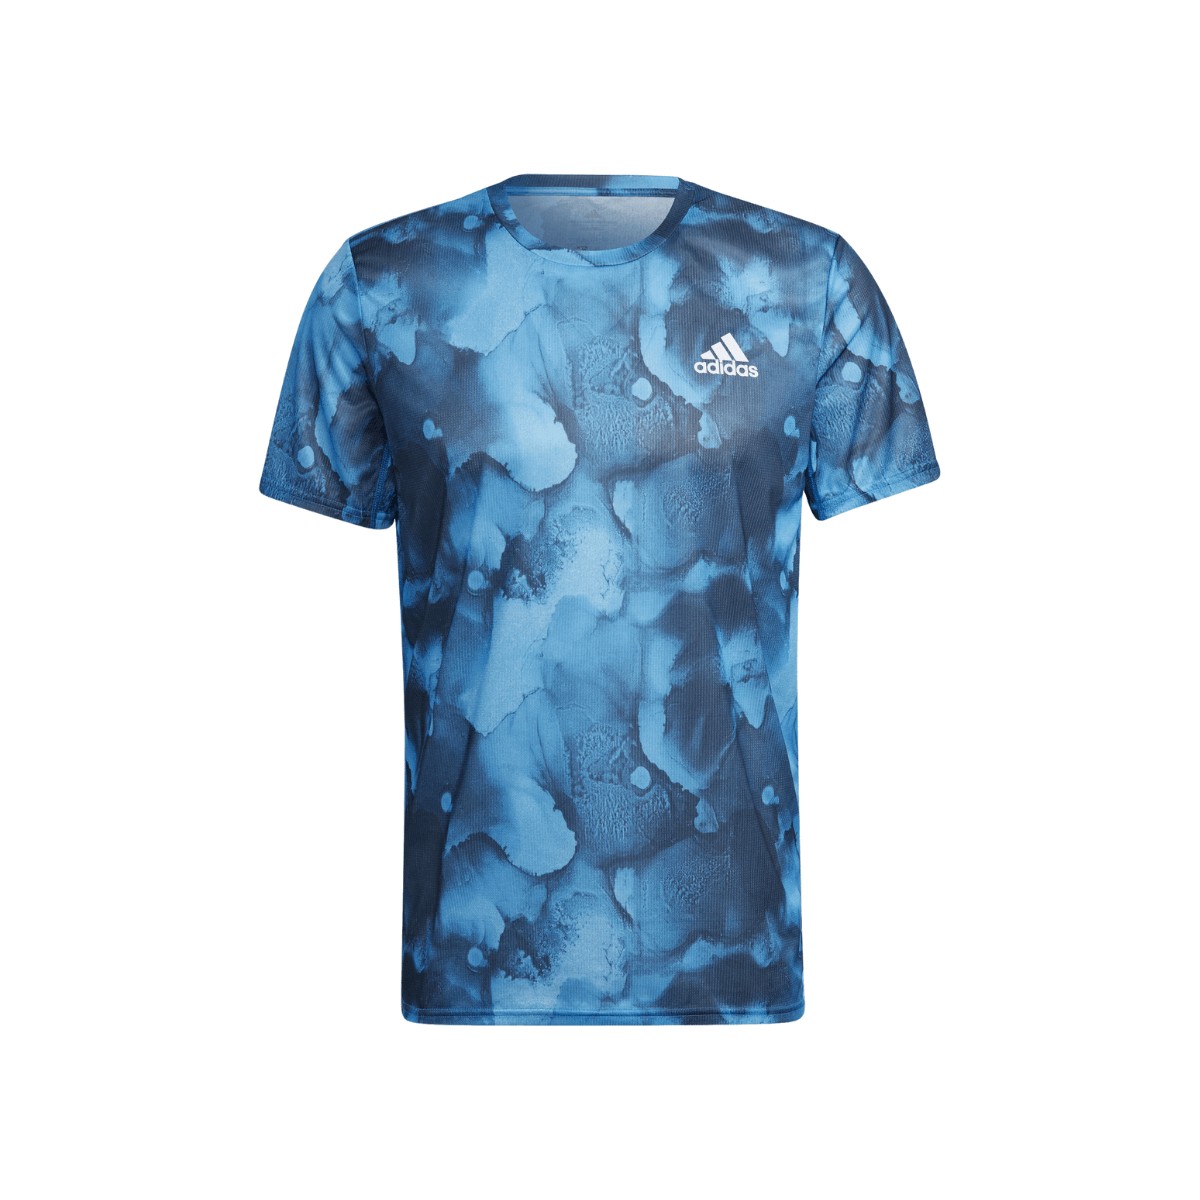 T-shirt Adidas Fast Graphic Bleu, Taille S